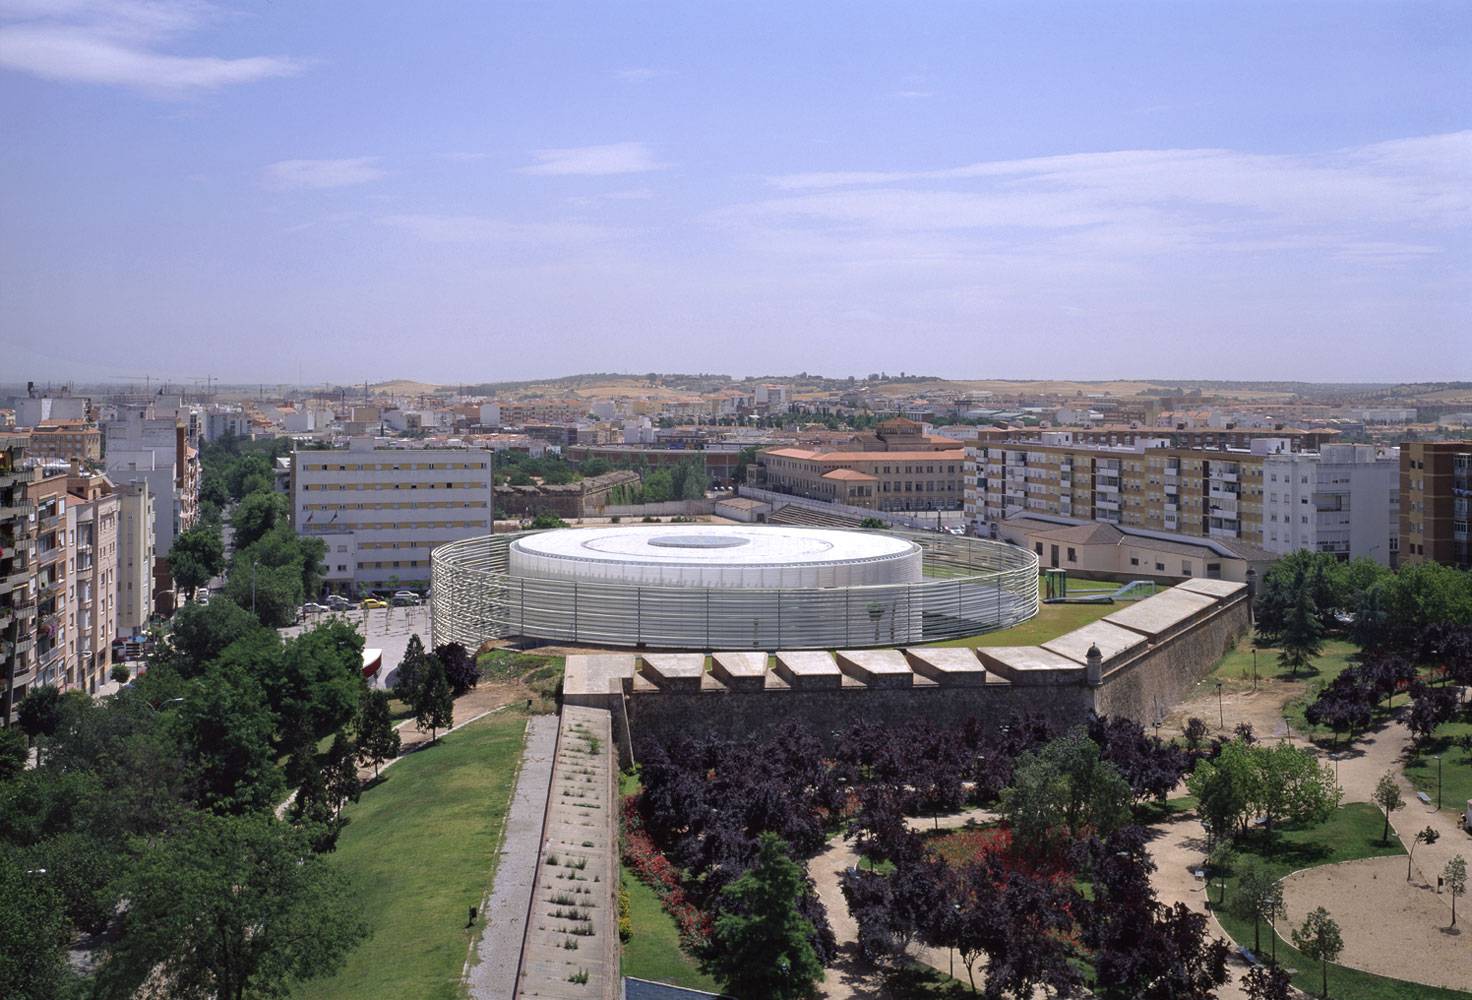 Badajoz Conference Centre and Auditorium is part of a revitalization project for the San Rogue fortress